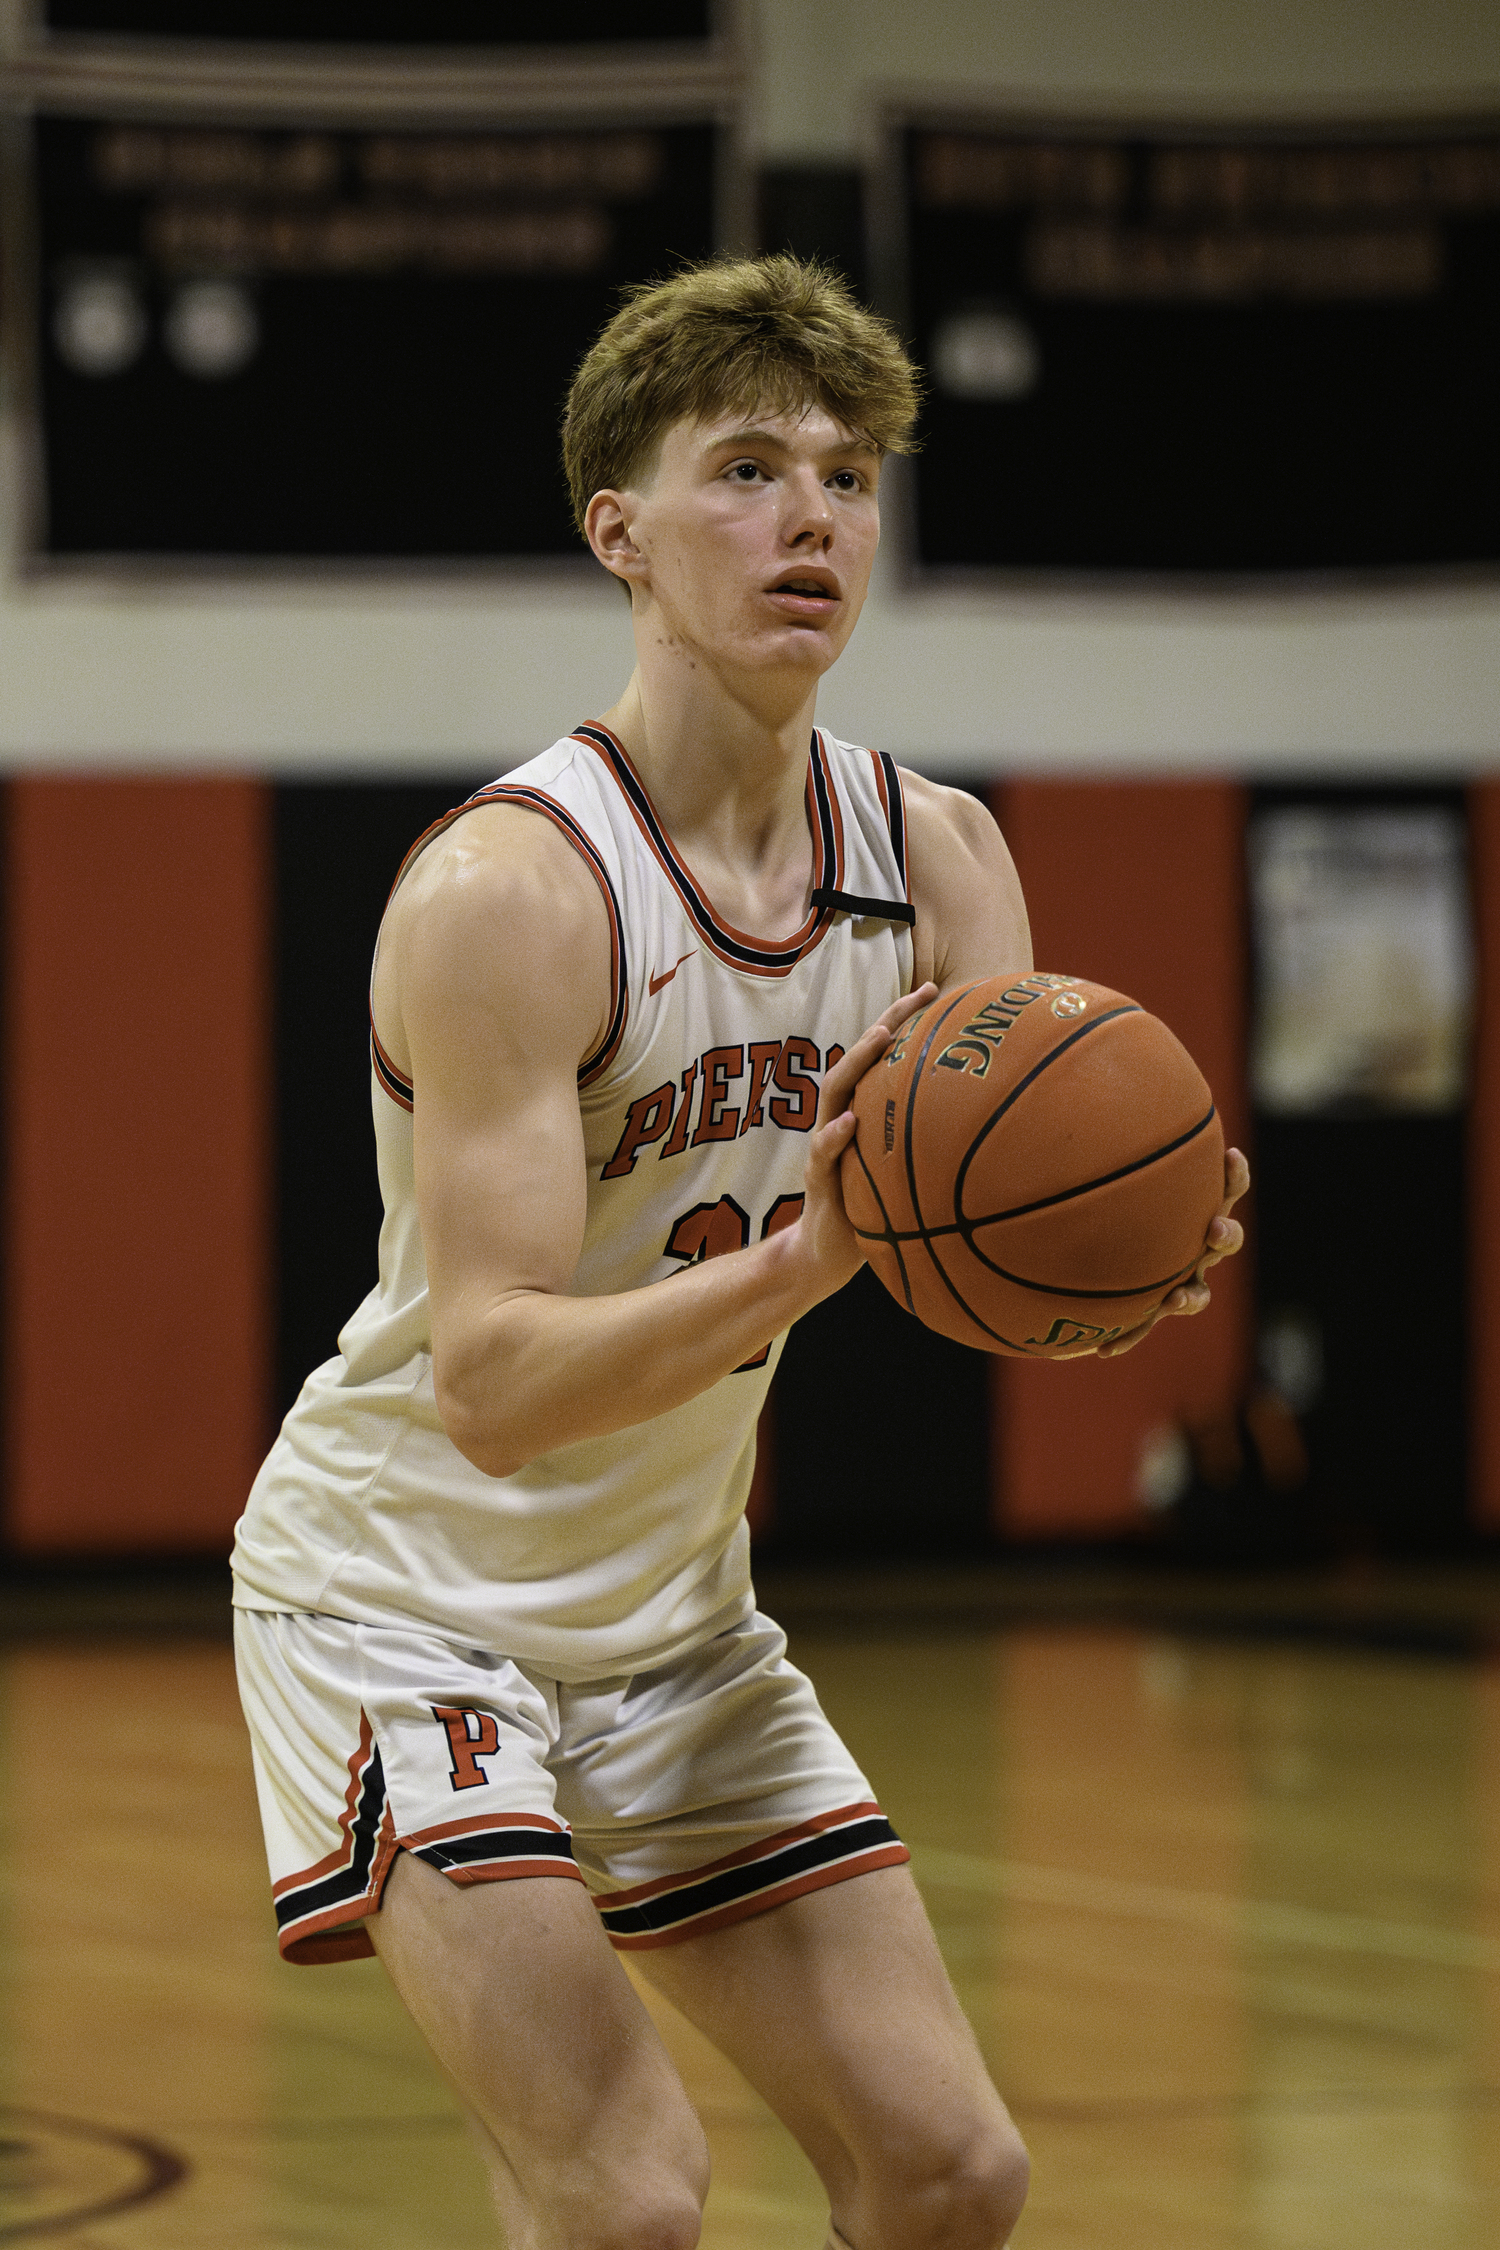 Pierson senior Luke Seltzer needed six points coming into last week's game against Babylon to reach 1,000 career points. He made all four of his free throws for career points 997, 998, 999 and 1,000 in the first quarter.  MARIANNE BARNETT